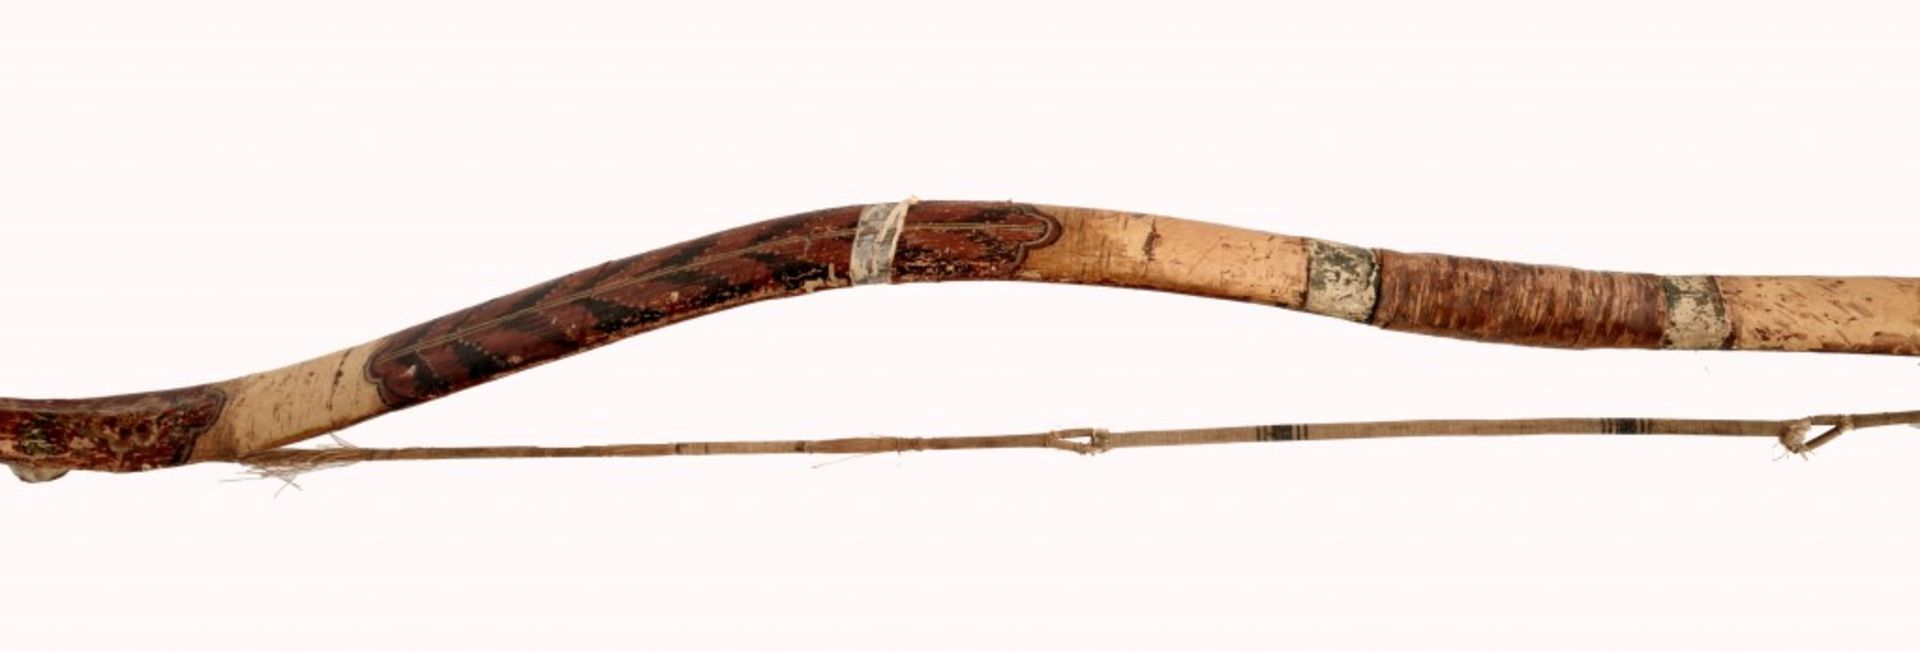 A Large Ottoman Reflex Bow - Image 2 of 4